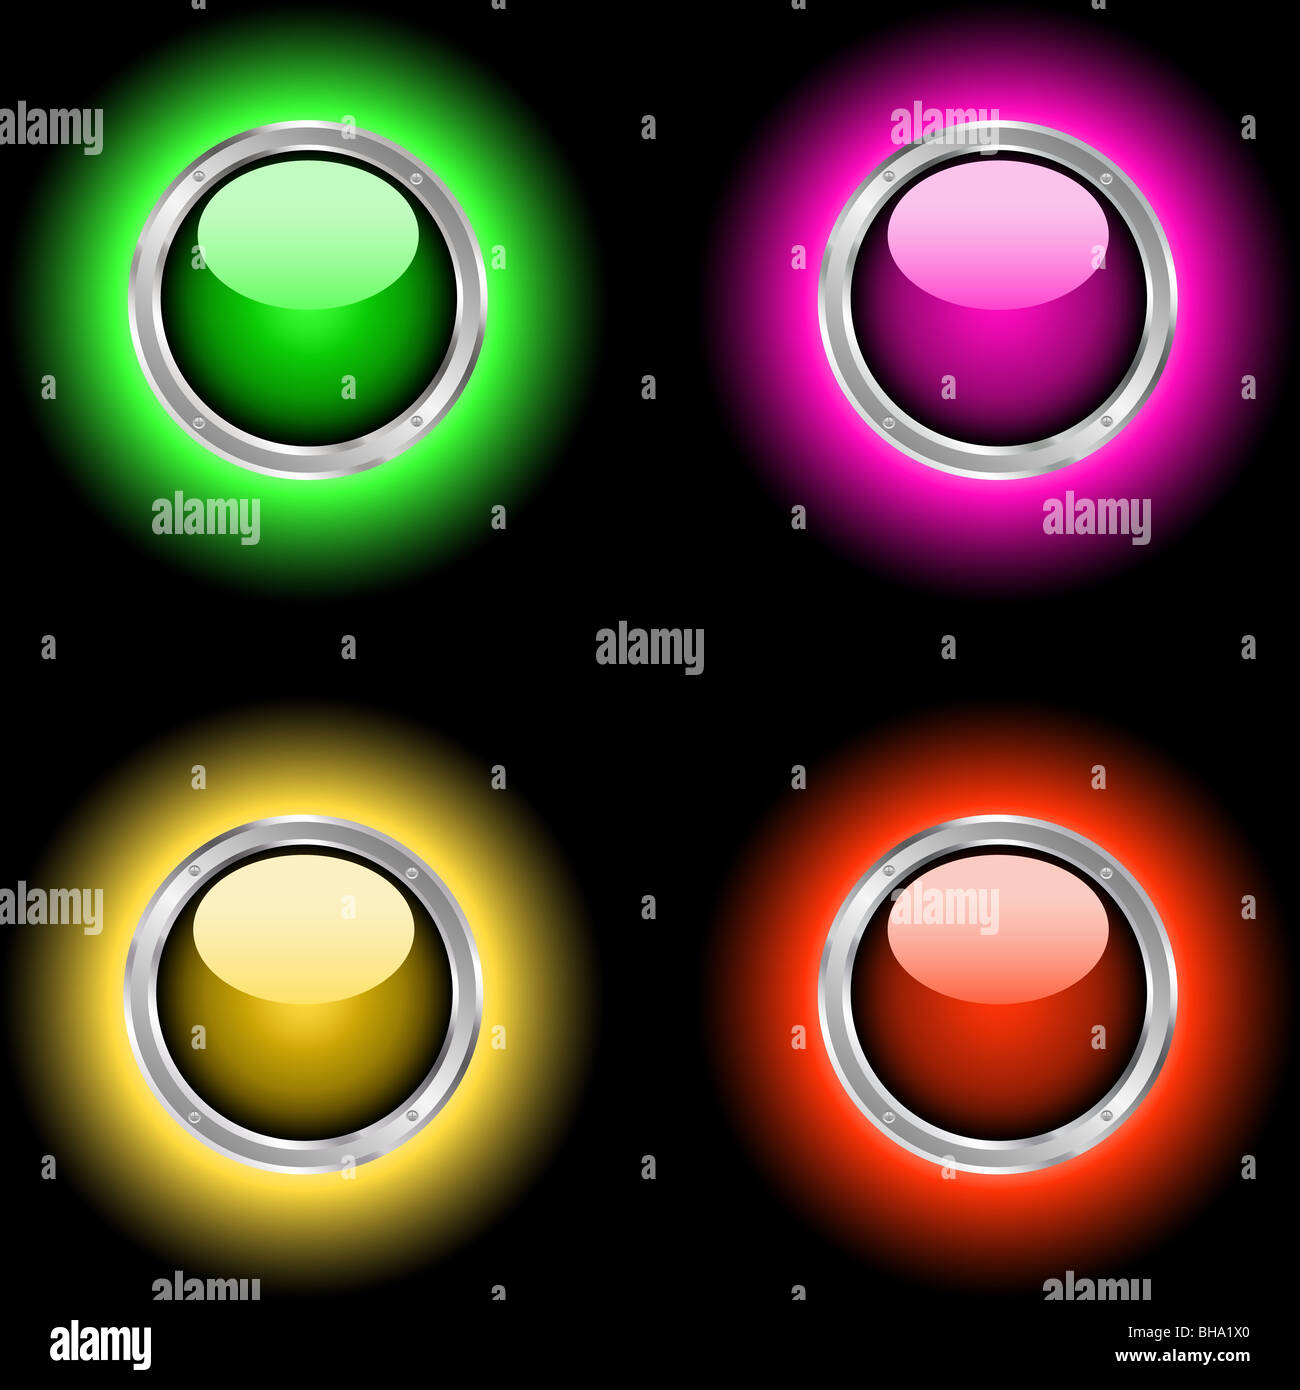 Glowing glossy buttons Stock Photo